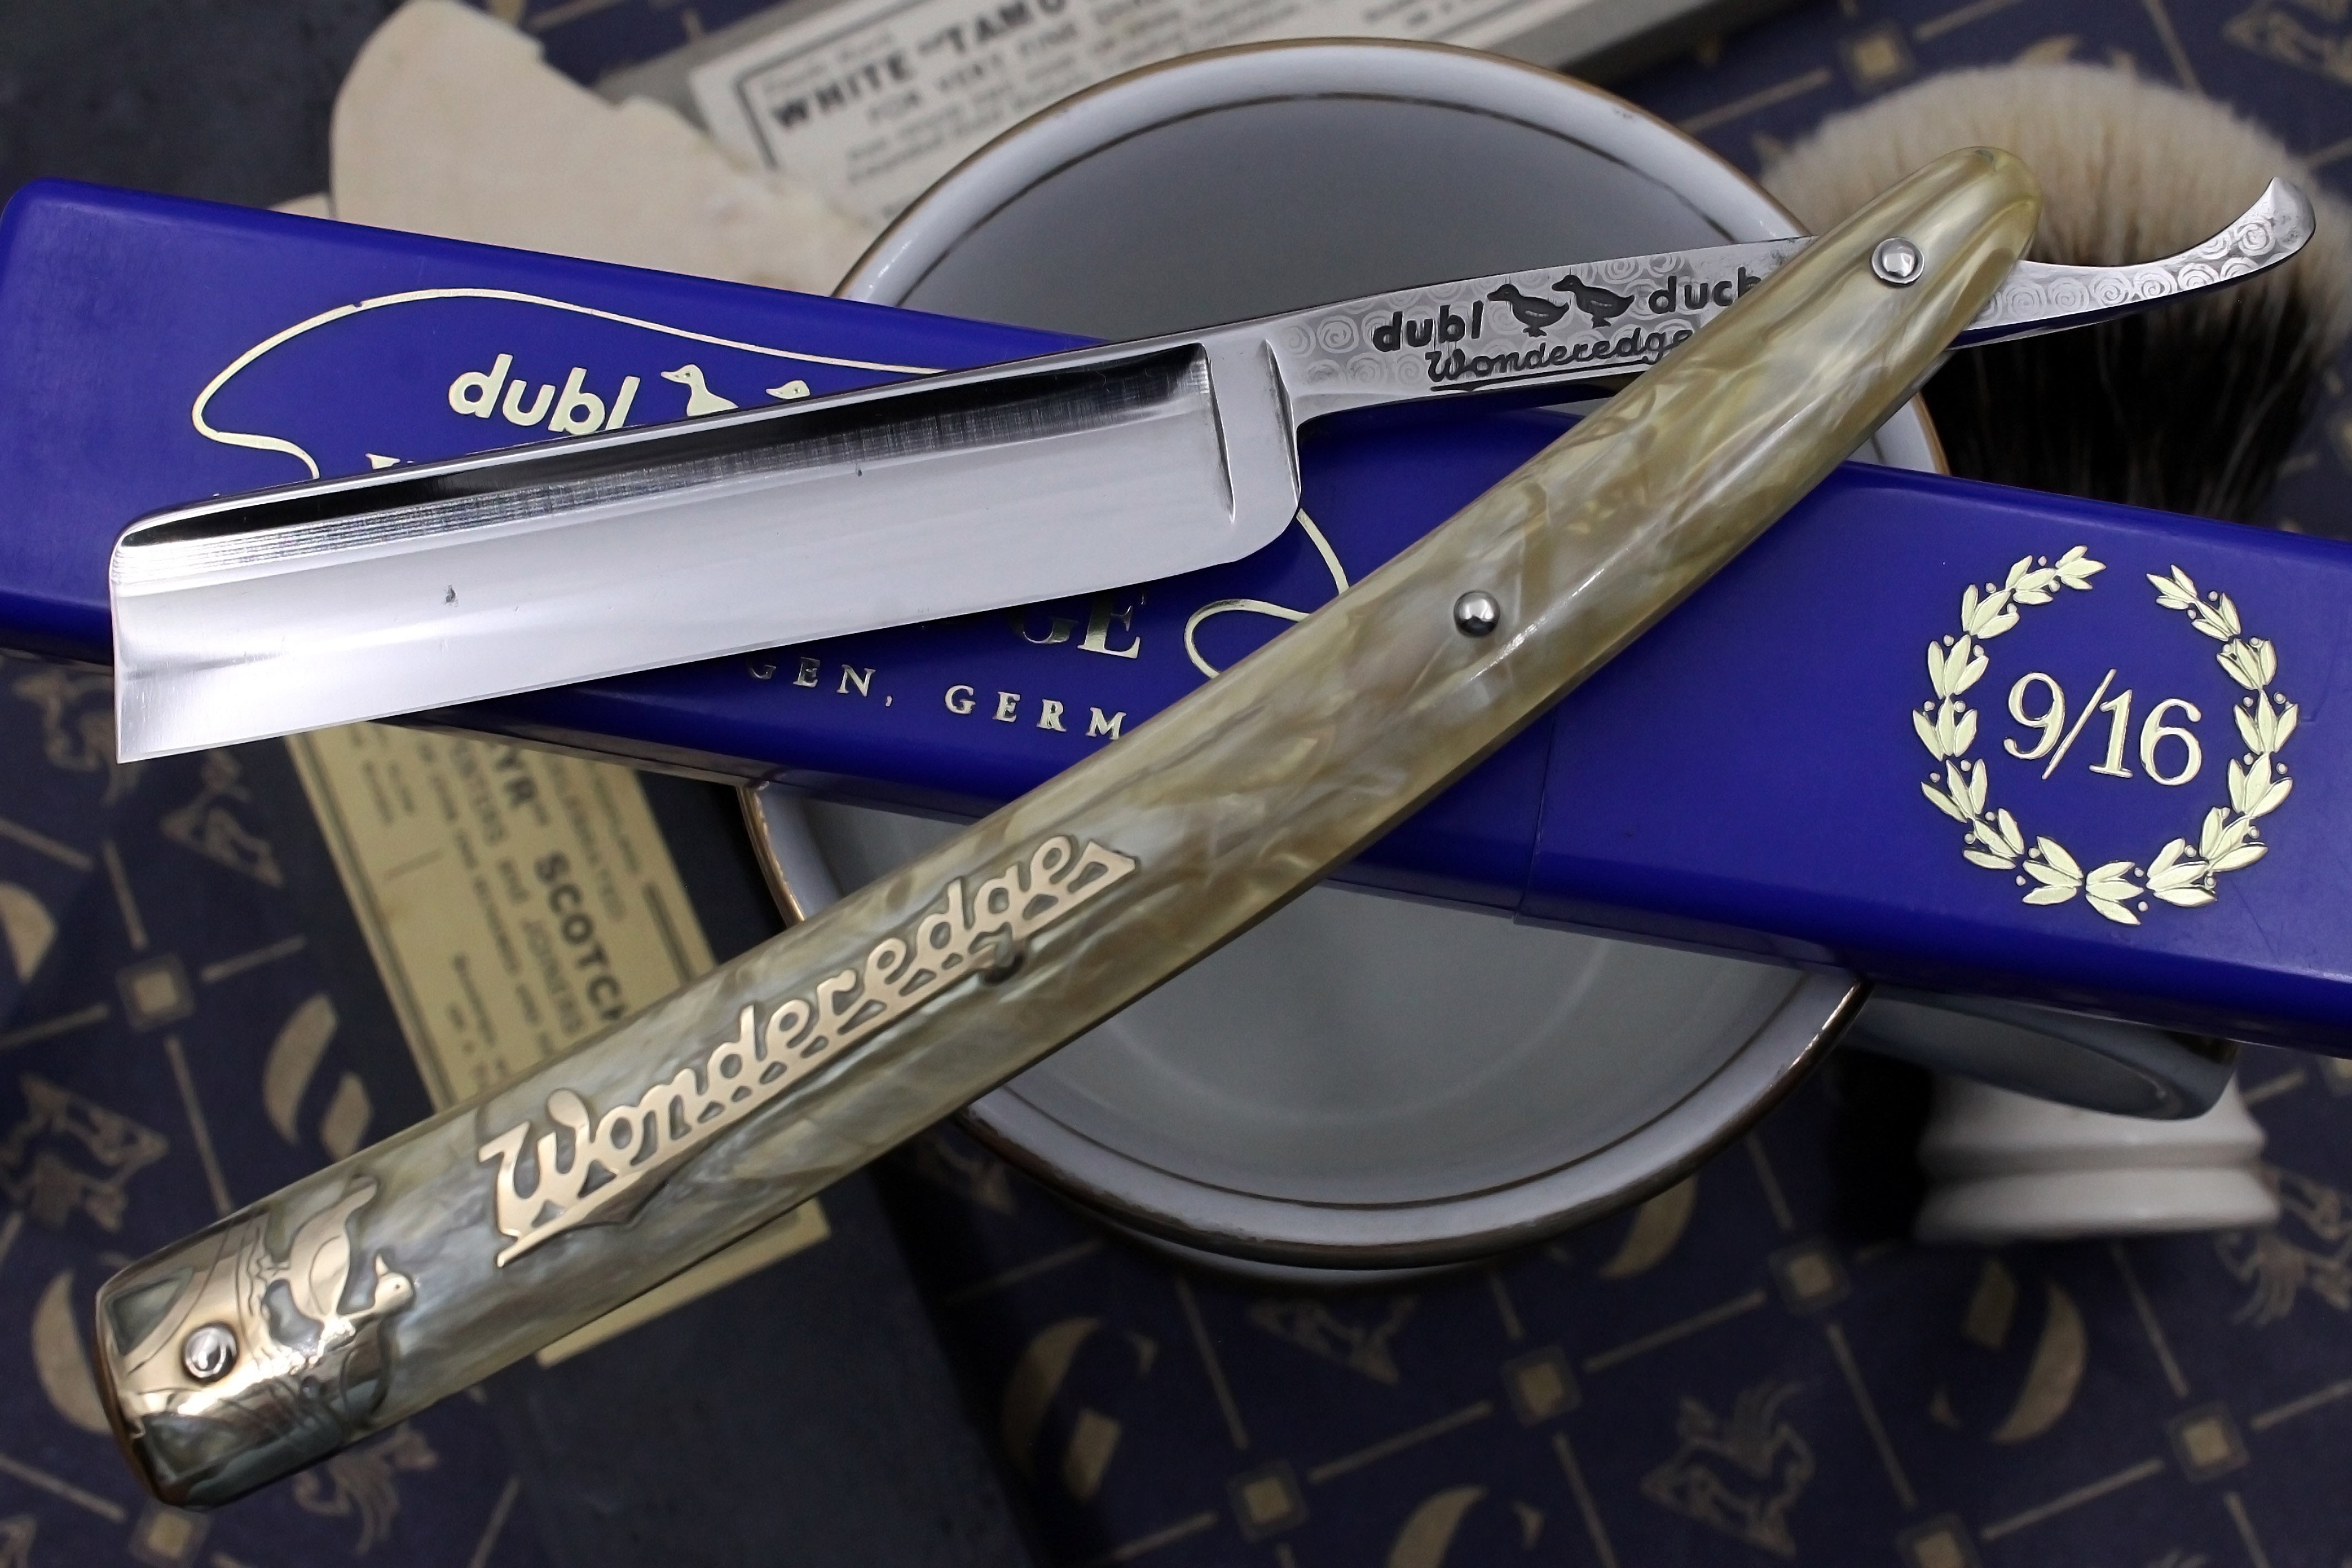 Dubl Duck Wonderedge 9/16 Blade Cracked Ice Scales - Fully Restored Vintage Solingen Straight Razor - Shave Ready